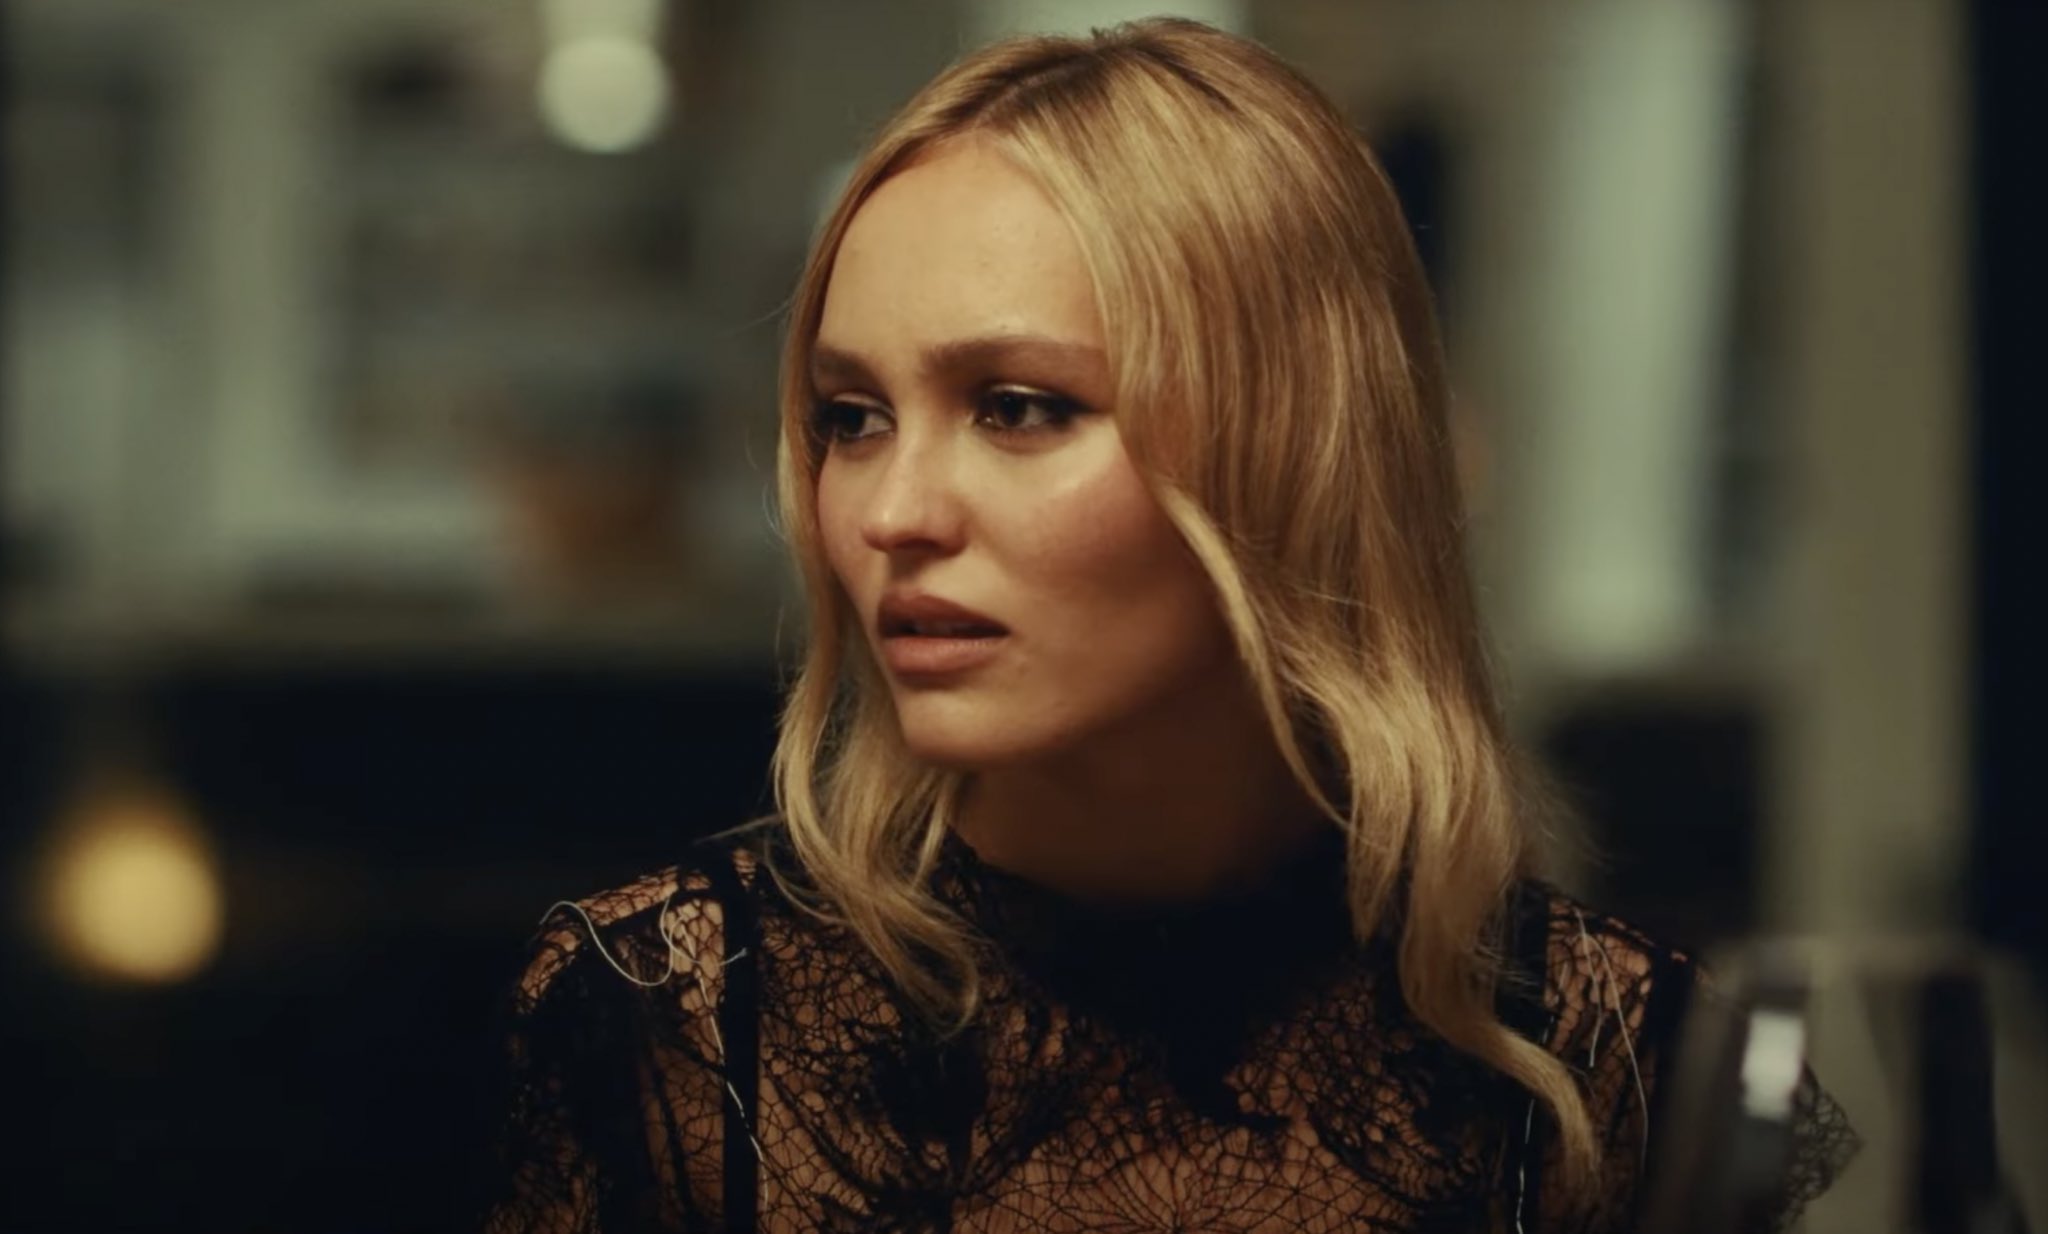 Lily-Rose Depp in The Idol HBO series